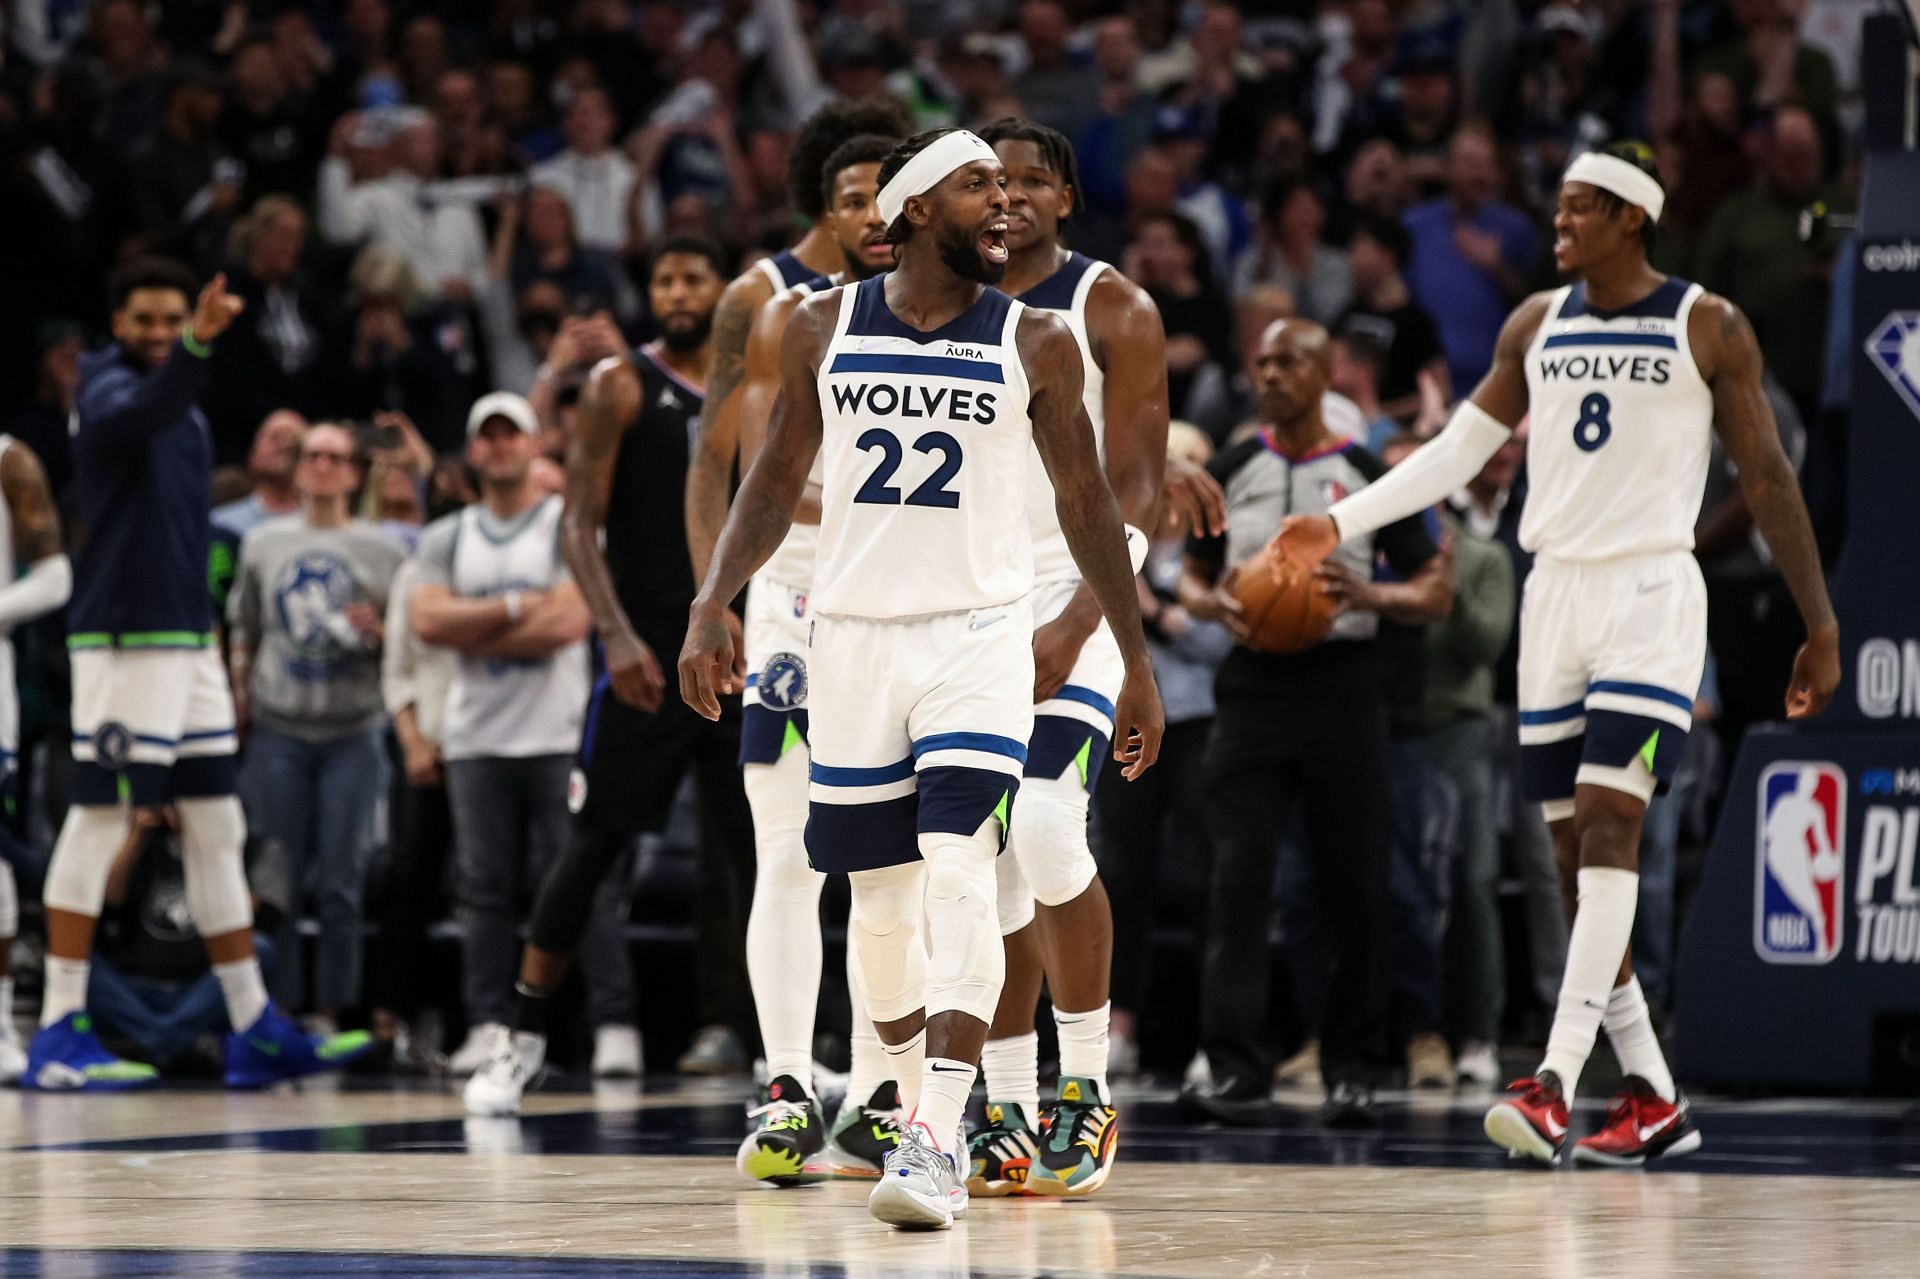 Minnesota Timberwolves need to re-group and put on a stellar performances when they face the Memphis Grizzlies in Game 4 of the series